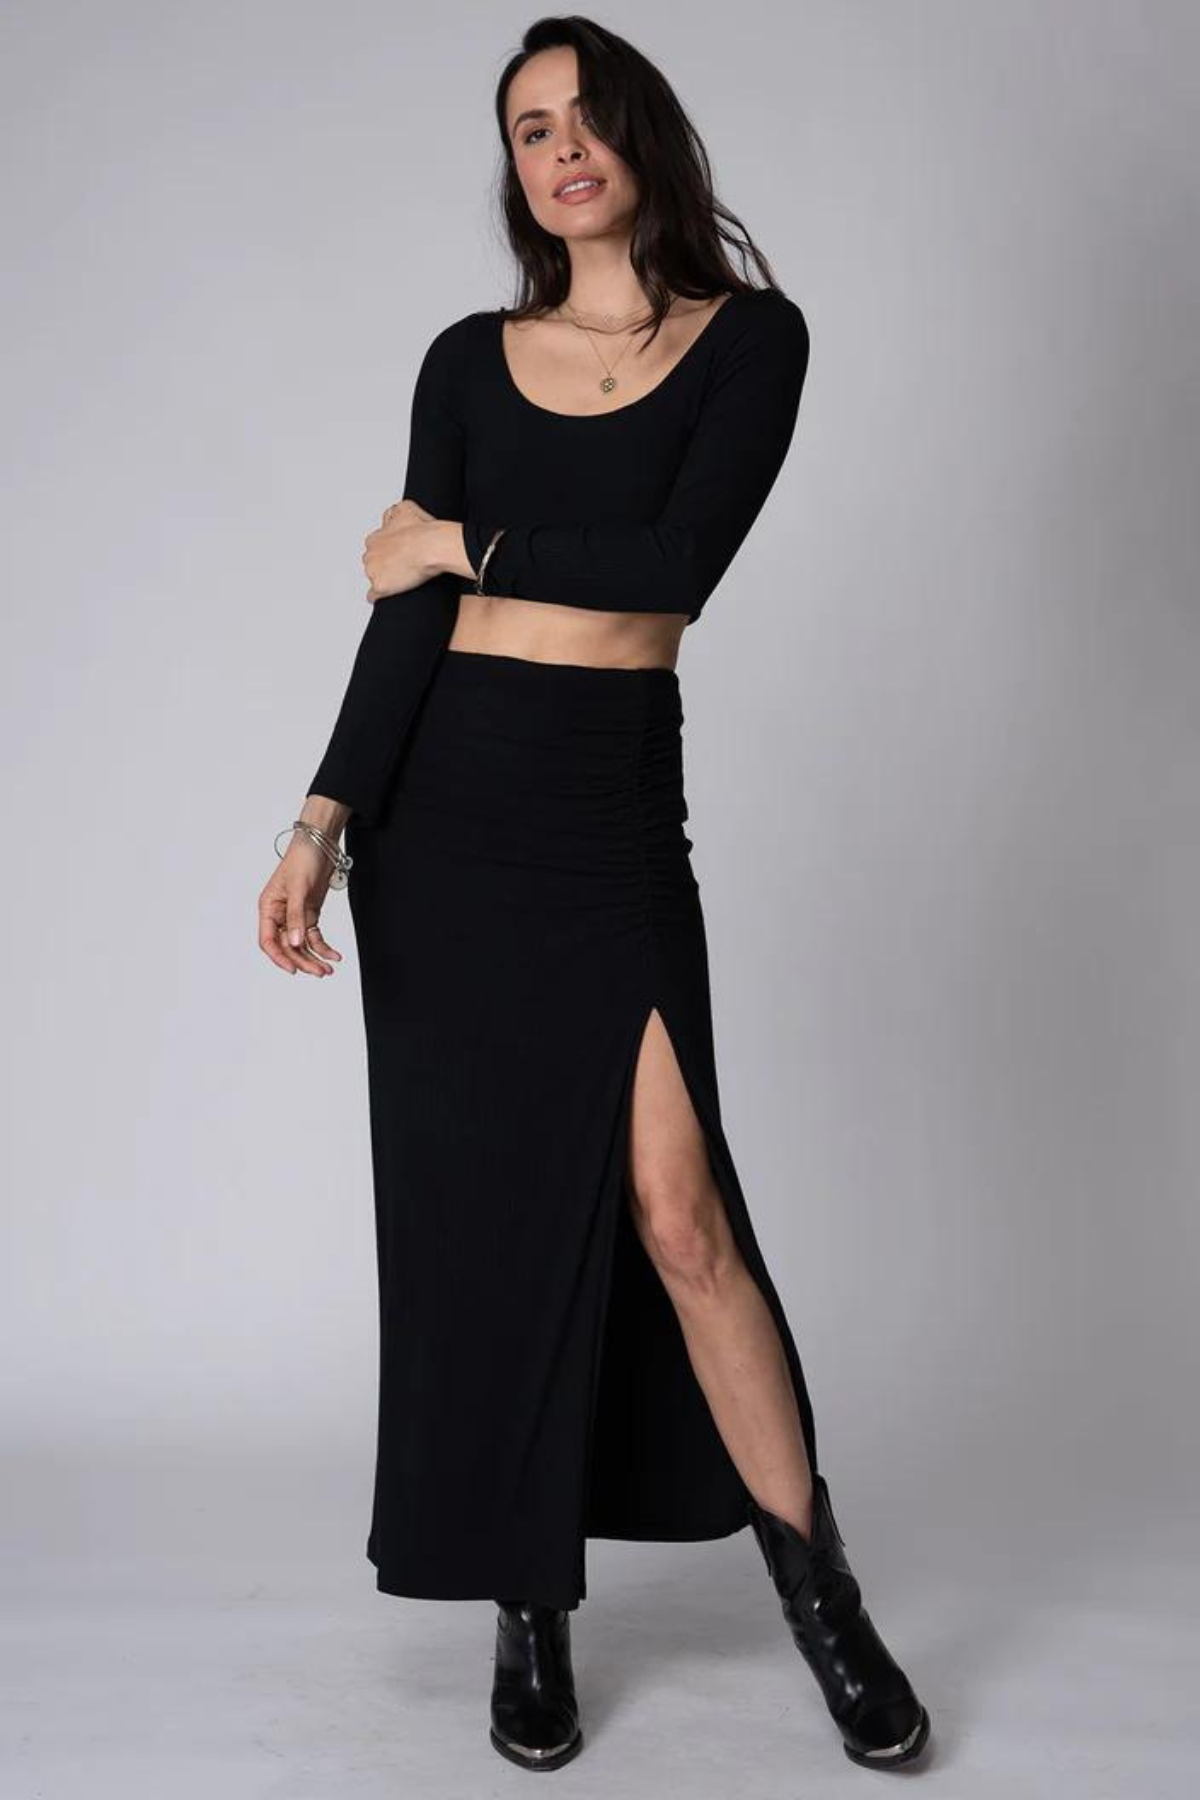 Get Together Maxi Skirt With Side Slit, Maxi Skirt by Stillwater | LIT Boutique